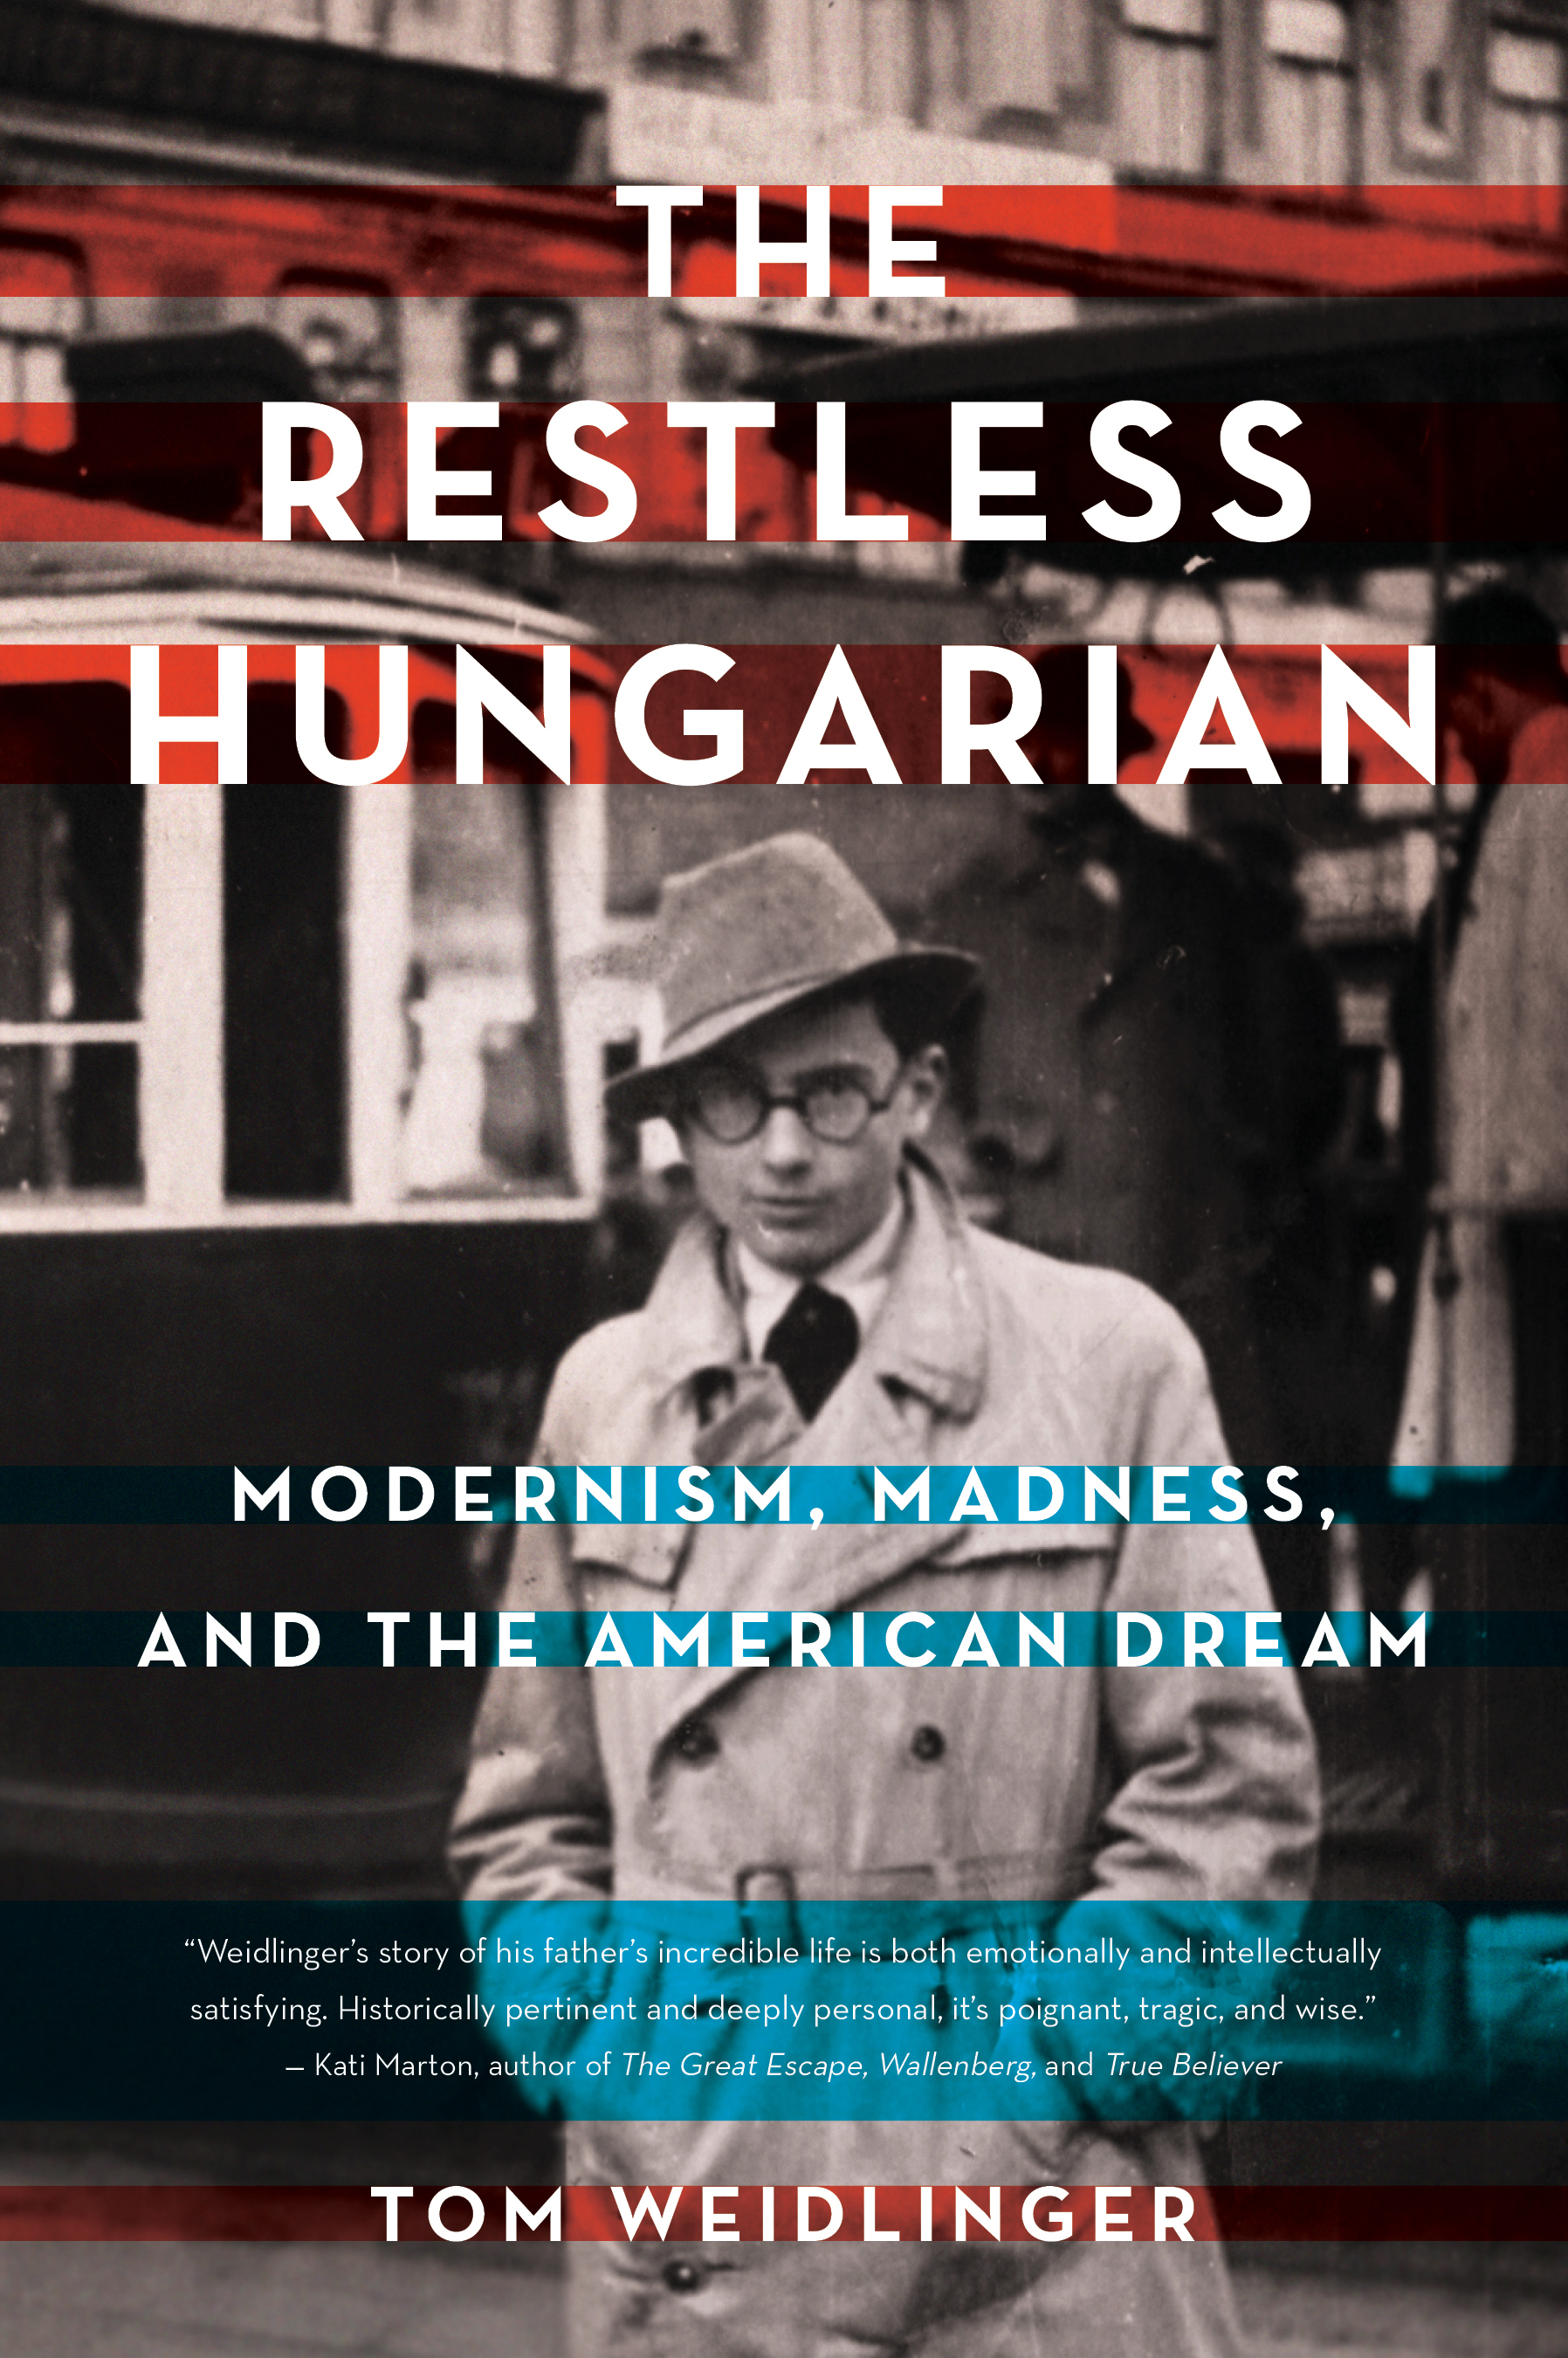 The Restless Hungarian